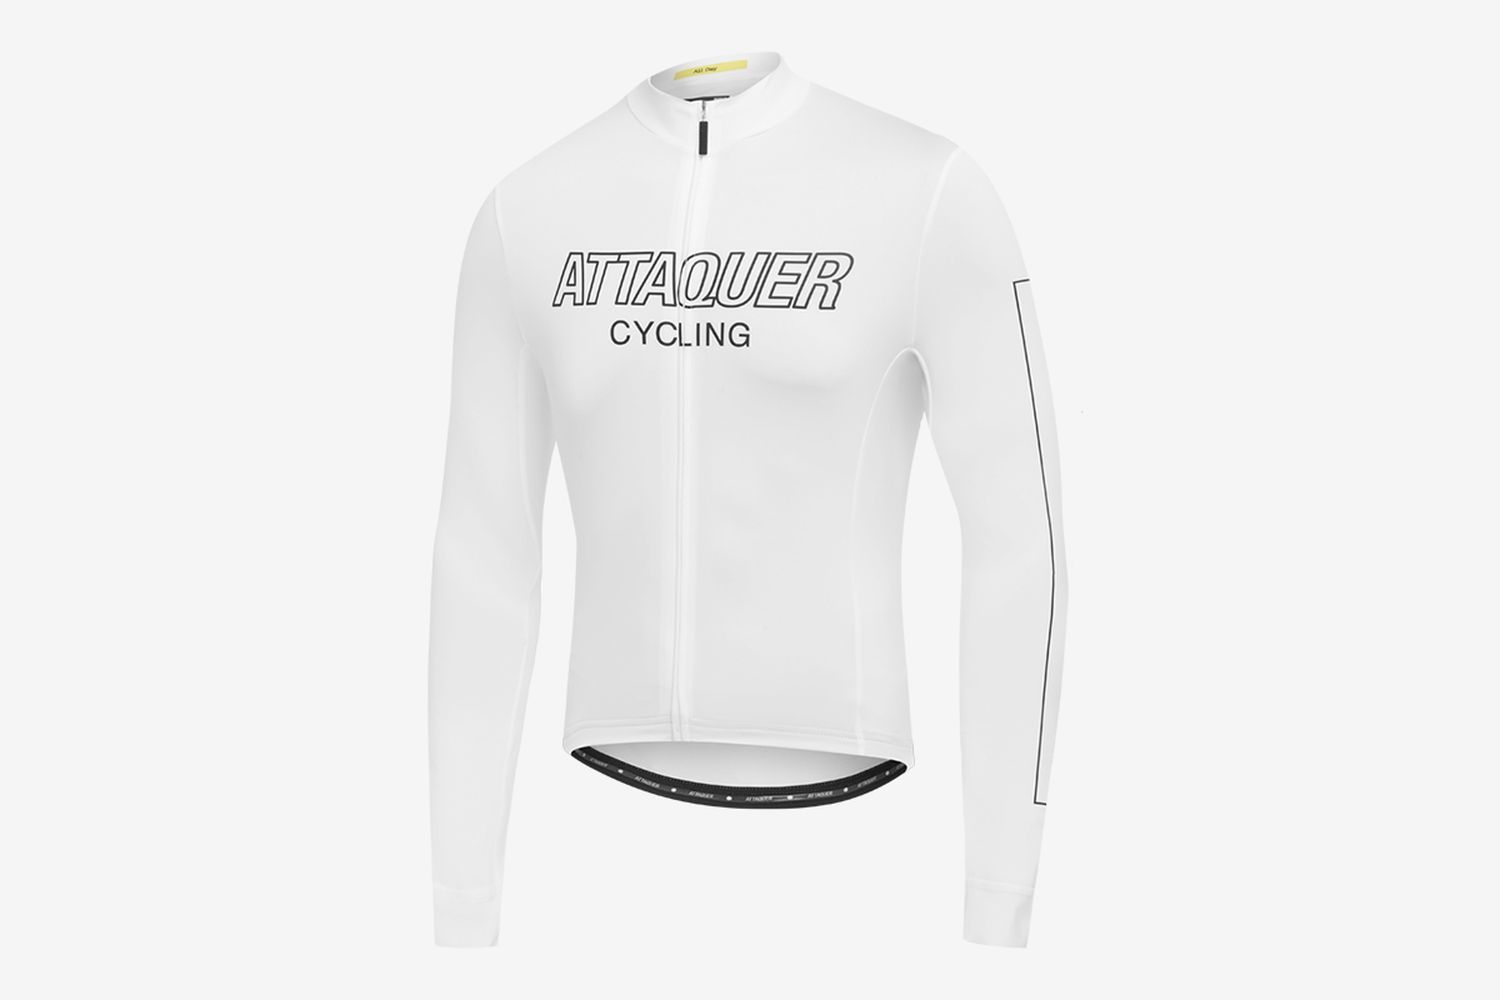 All Day Outliner Long-Sleeve